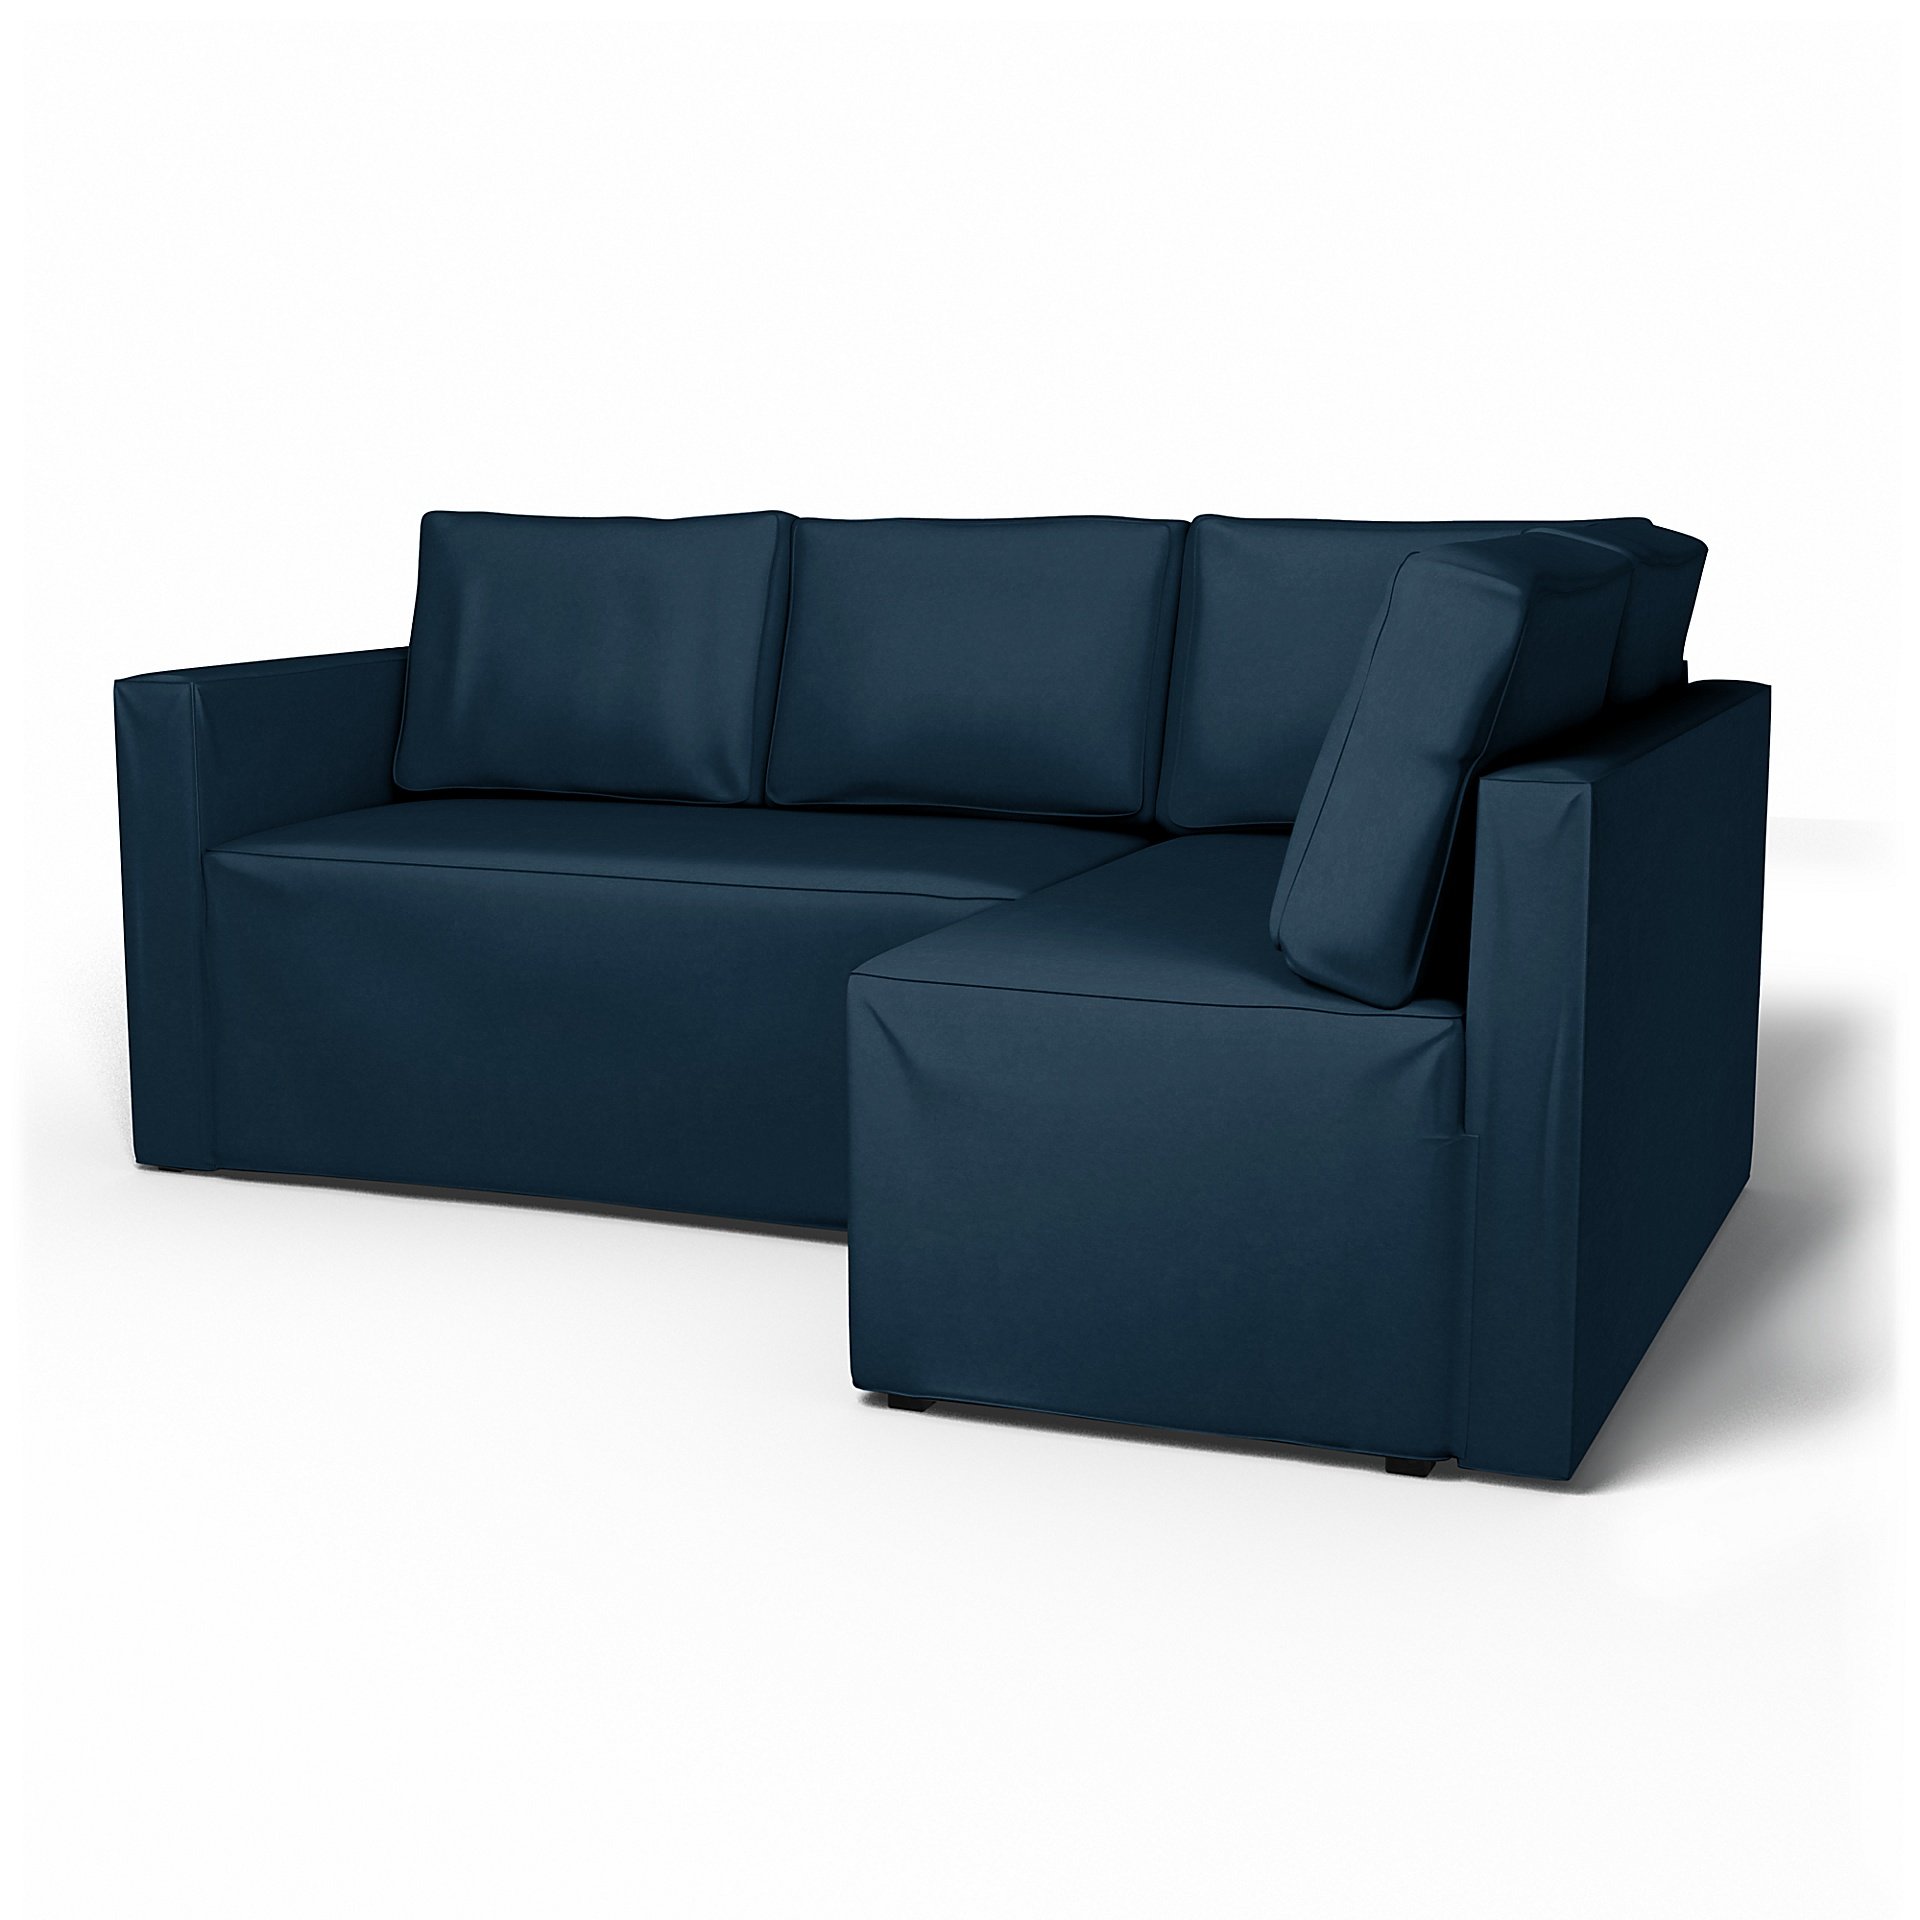 IKEA - Fagelbo Sofa Bed with Right Chaise Cover, Midnight, Velvet - Bemz